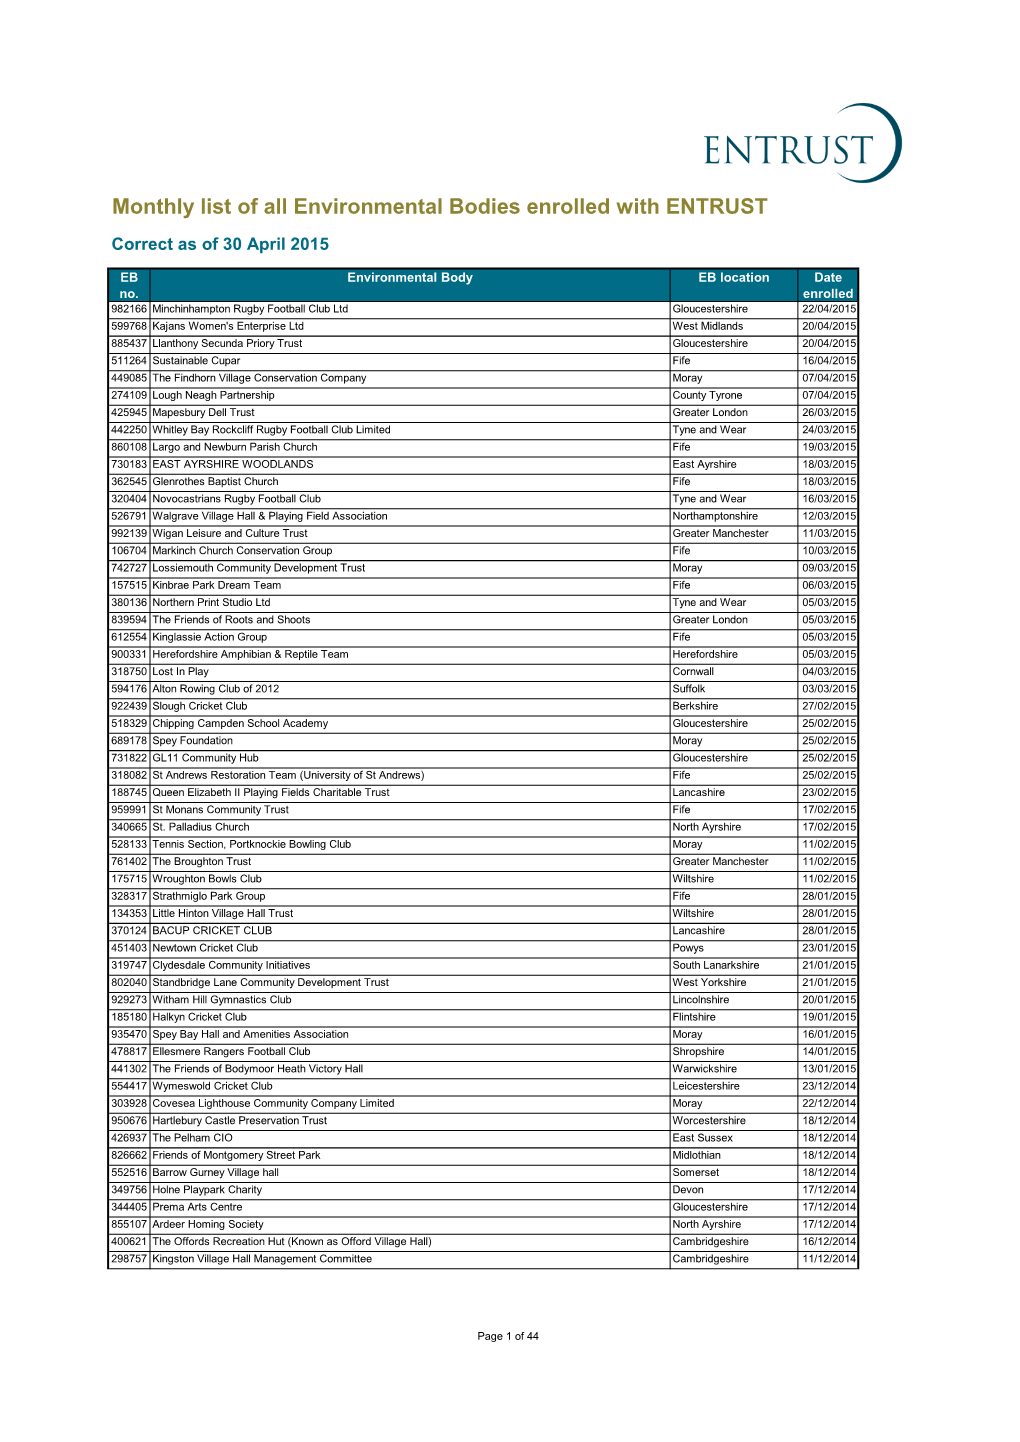 Monthly List of All Environmental Bodies Enrolled with ENTRUST